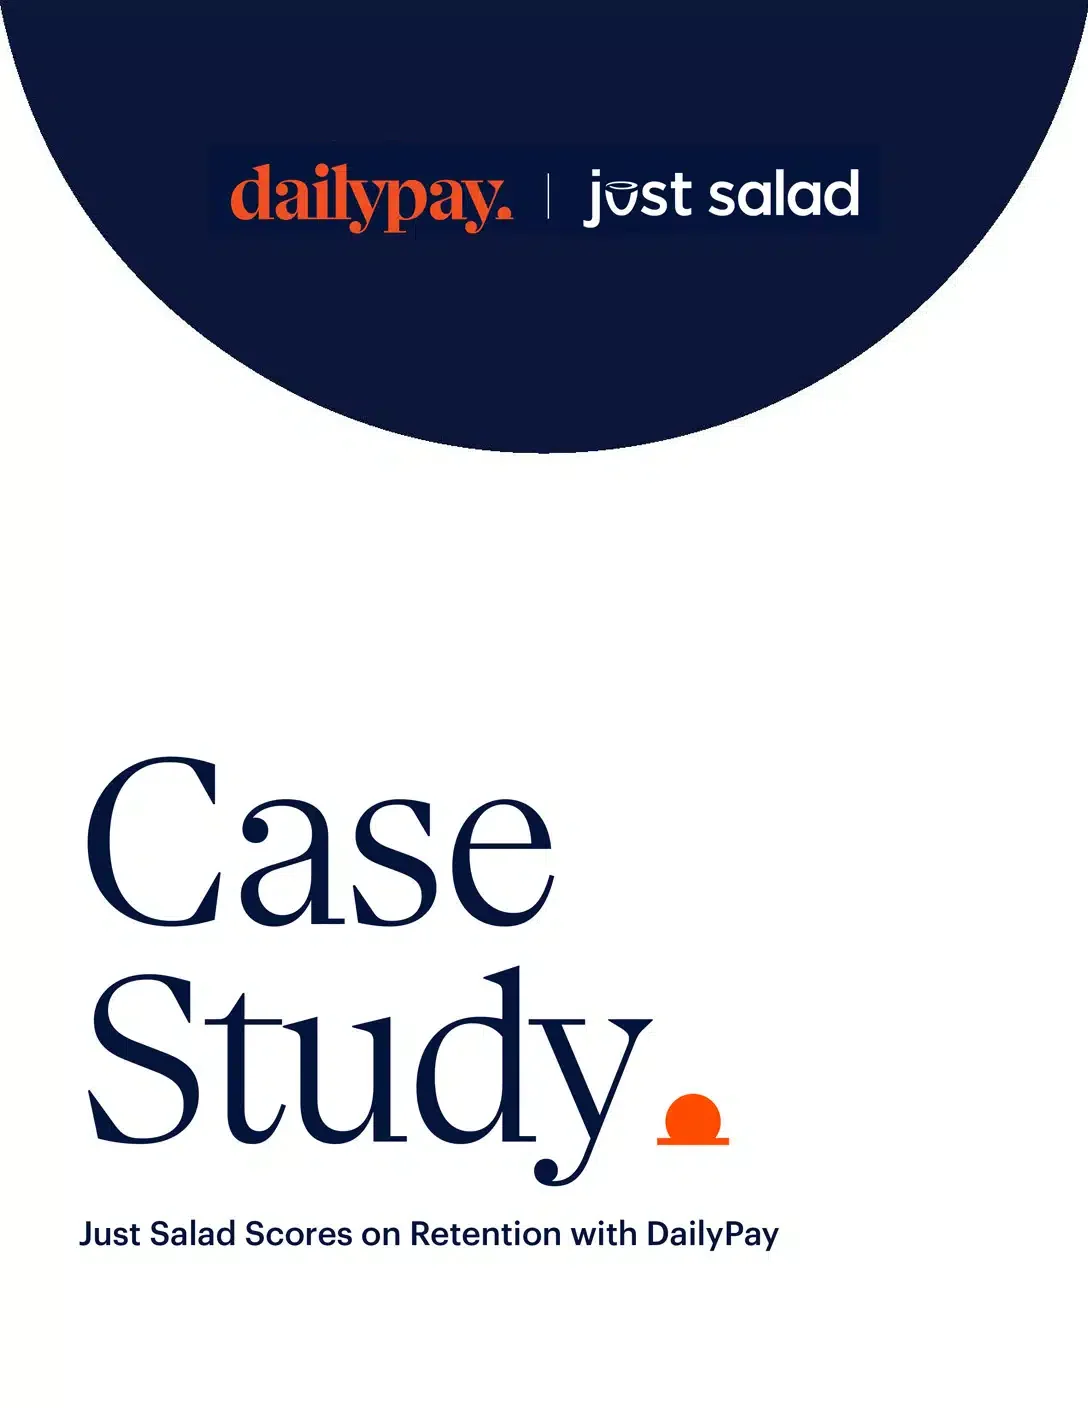 Cover page of a document titled "Case Study" featuring logos of DailyPay and Just Salad, with a subtitle "Just Salad Scores on Retention with DailyPay.